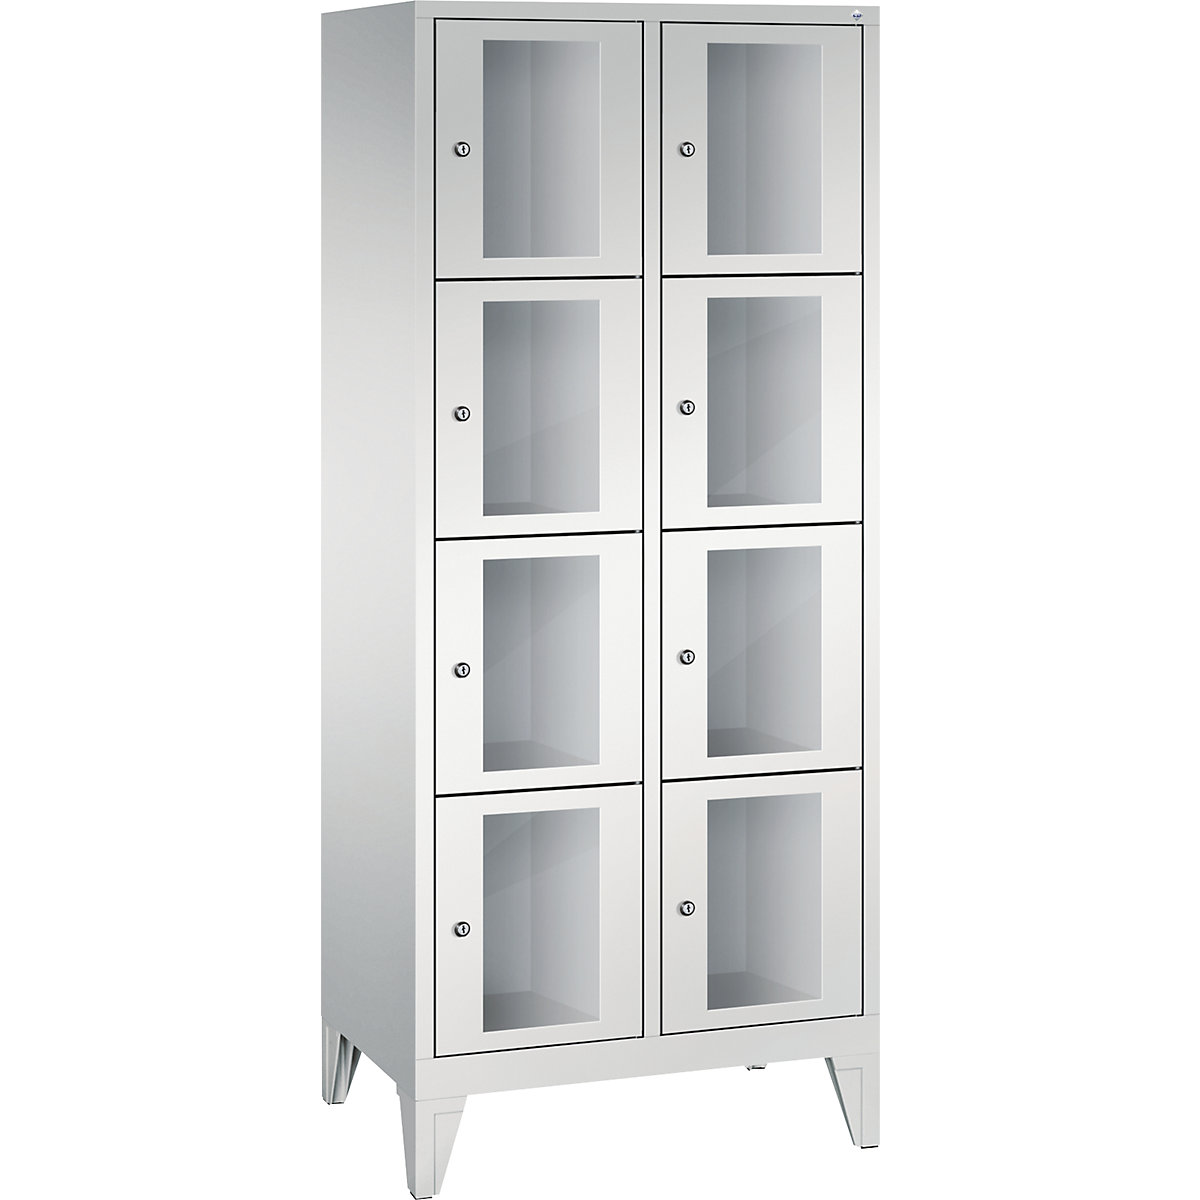 CLASSIC locker unit, compartment height 375 mm, with feet – C+P, 8 compartments, width 810 mm, light grey door-3